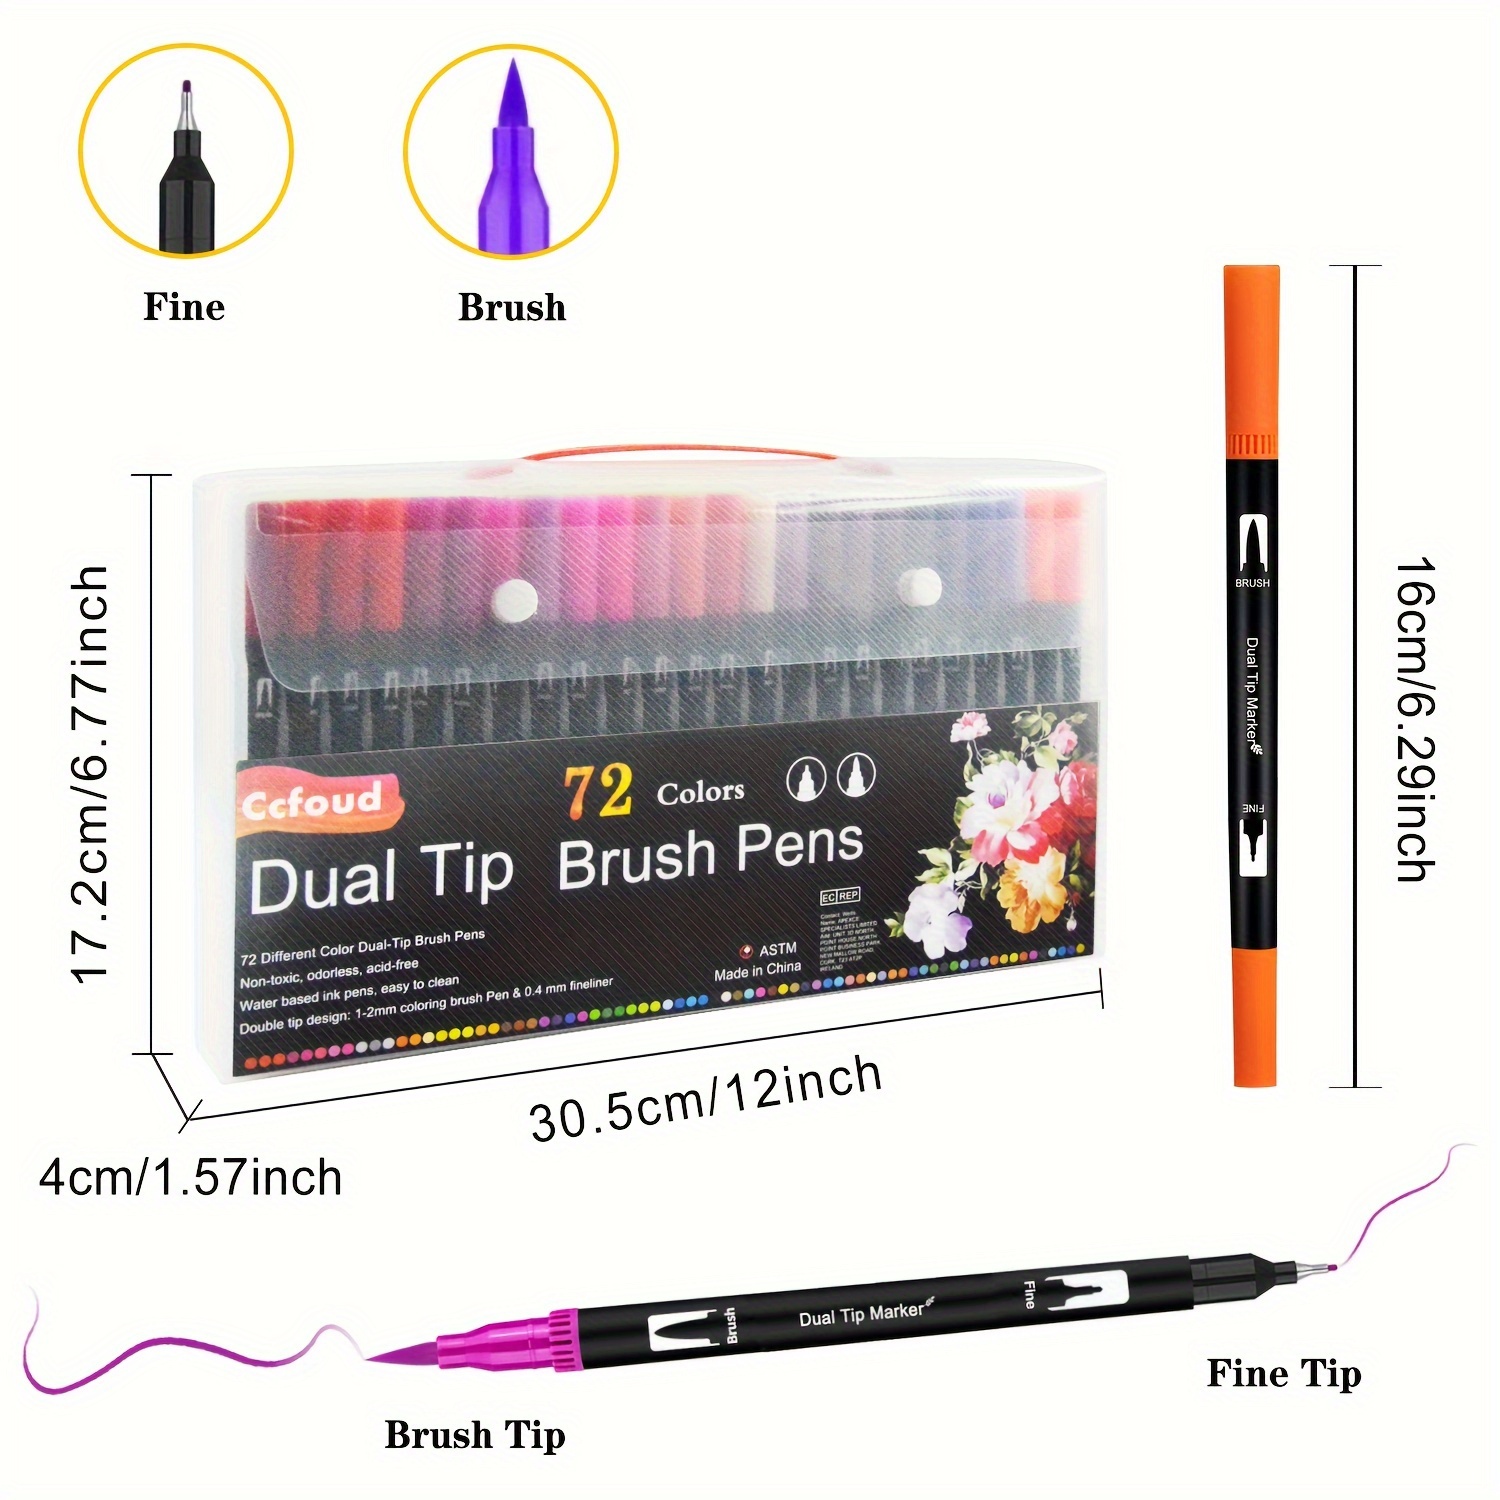 Ccfoud 72 Colors Artist Markers Dual Tip Pens，Art Marker For Coloring, Fine  And Pointed Pen Art Supply For Adults Coloring Books, Bullet Diary, Drawin